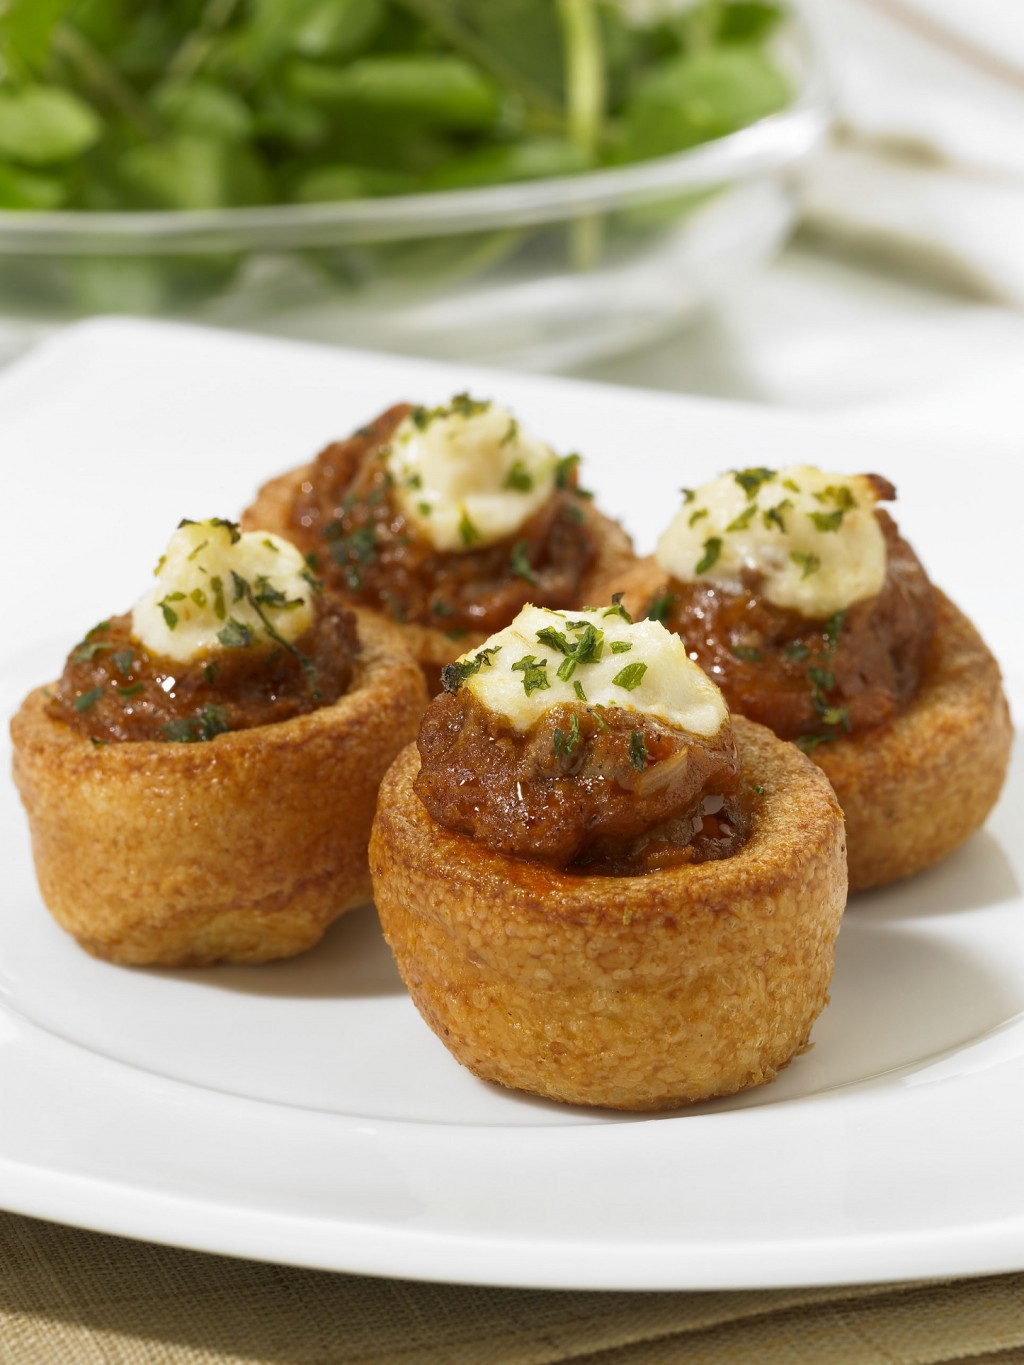 FRANK DALE Mini Yorkshire Puddings with Beef & Horseradish